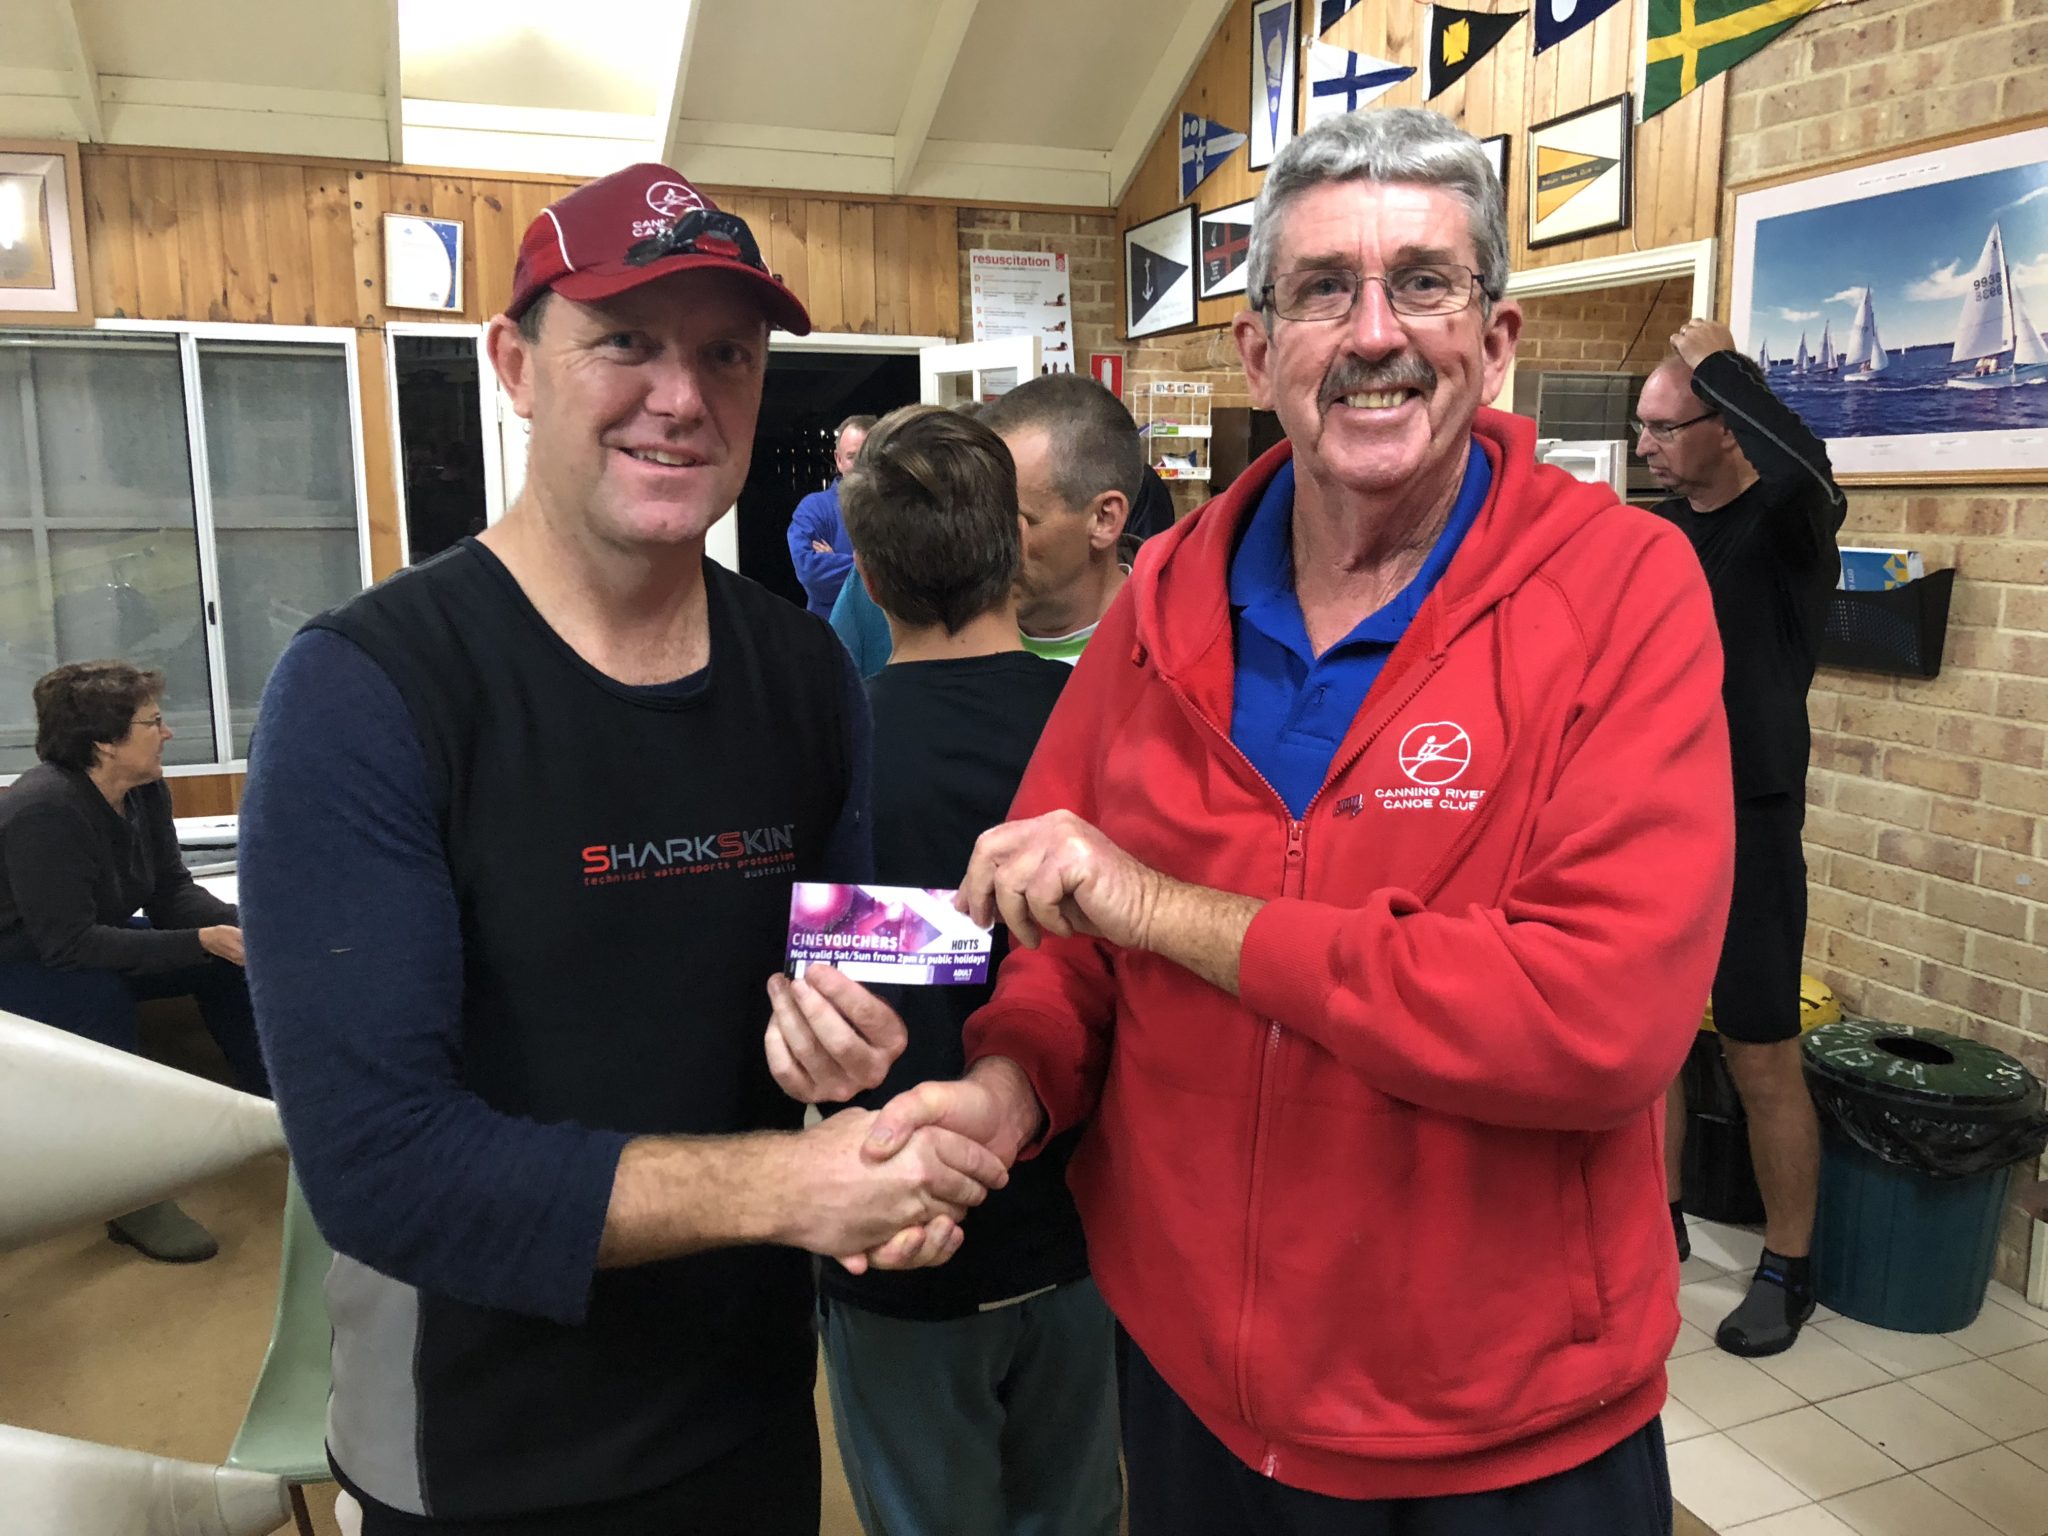 Tuesday 29th May 2018 : Tonight’s photo shows Dave Griffiths presenting Simon O’Sullivan with a movie voucher